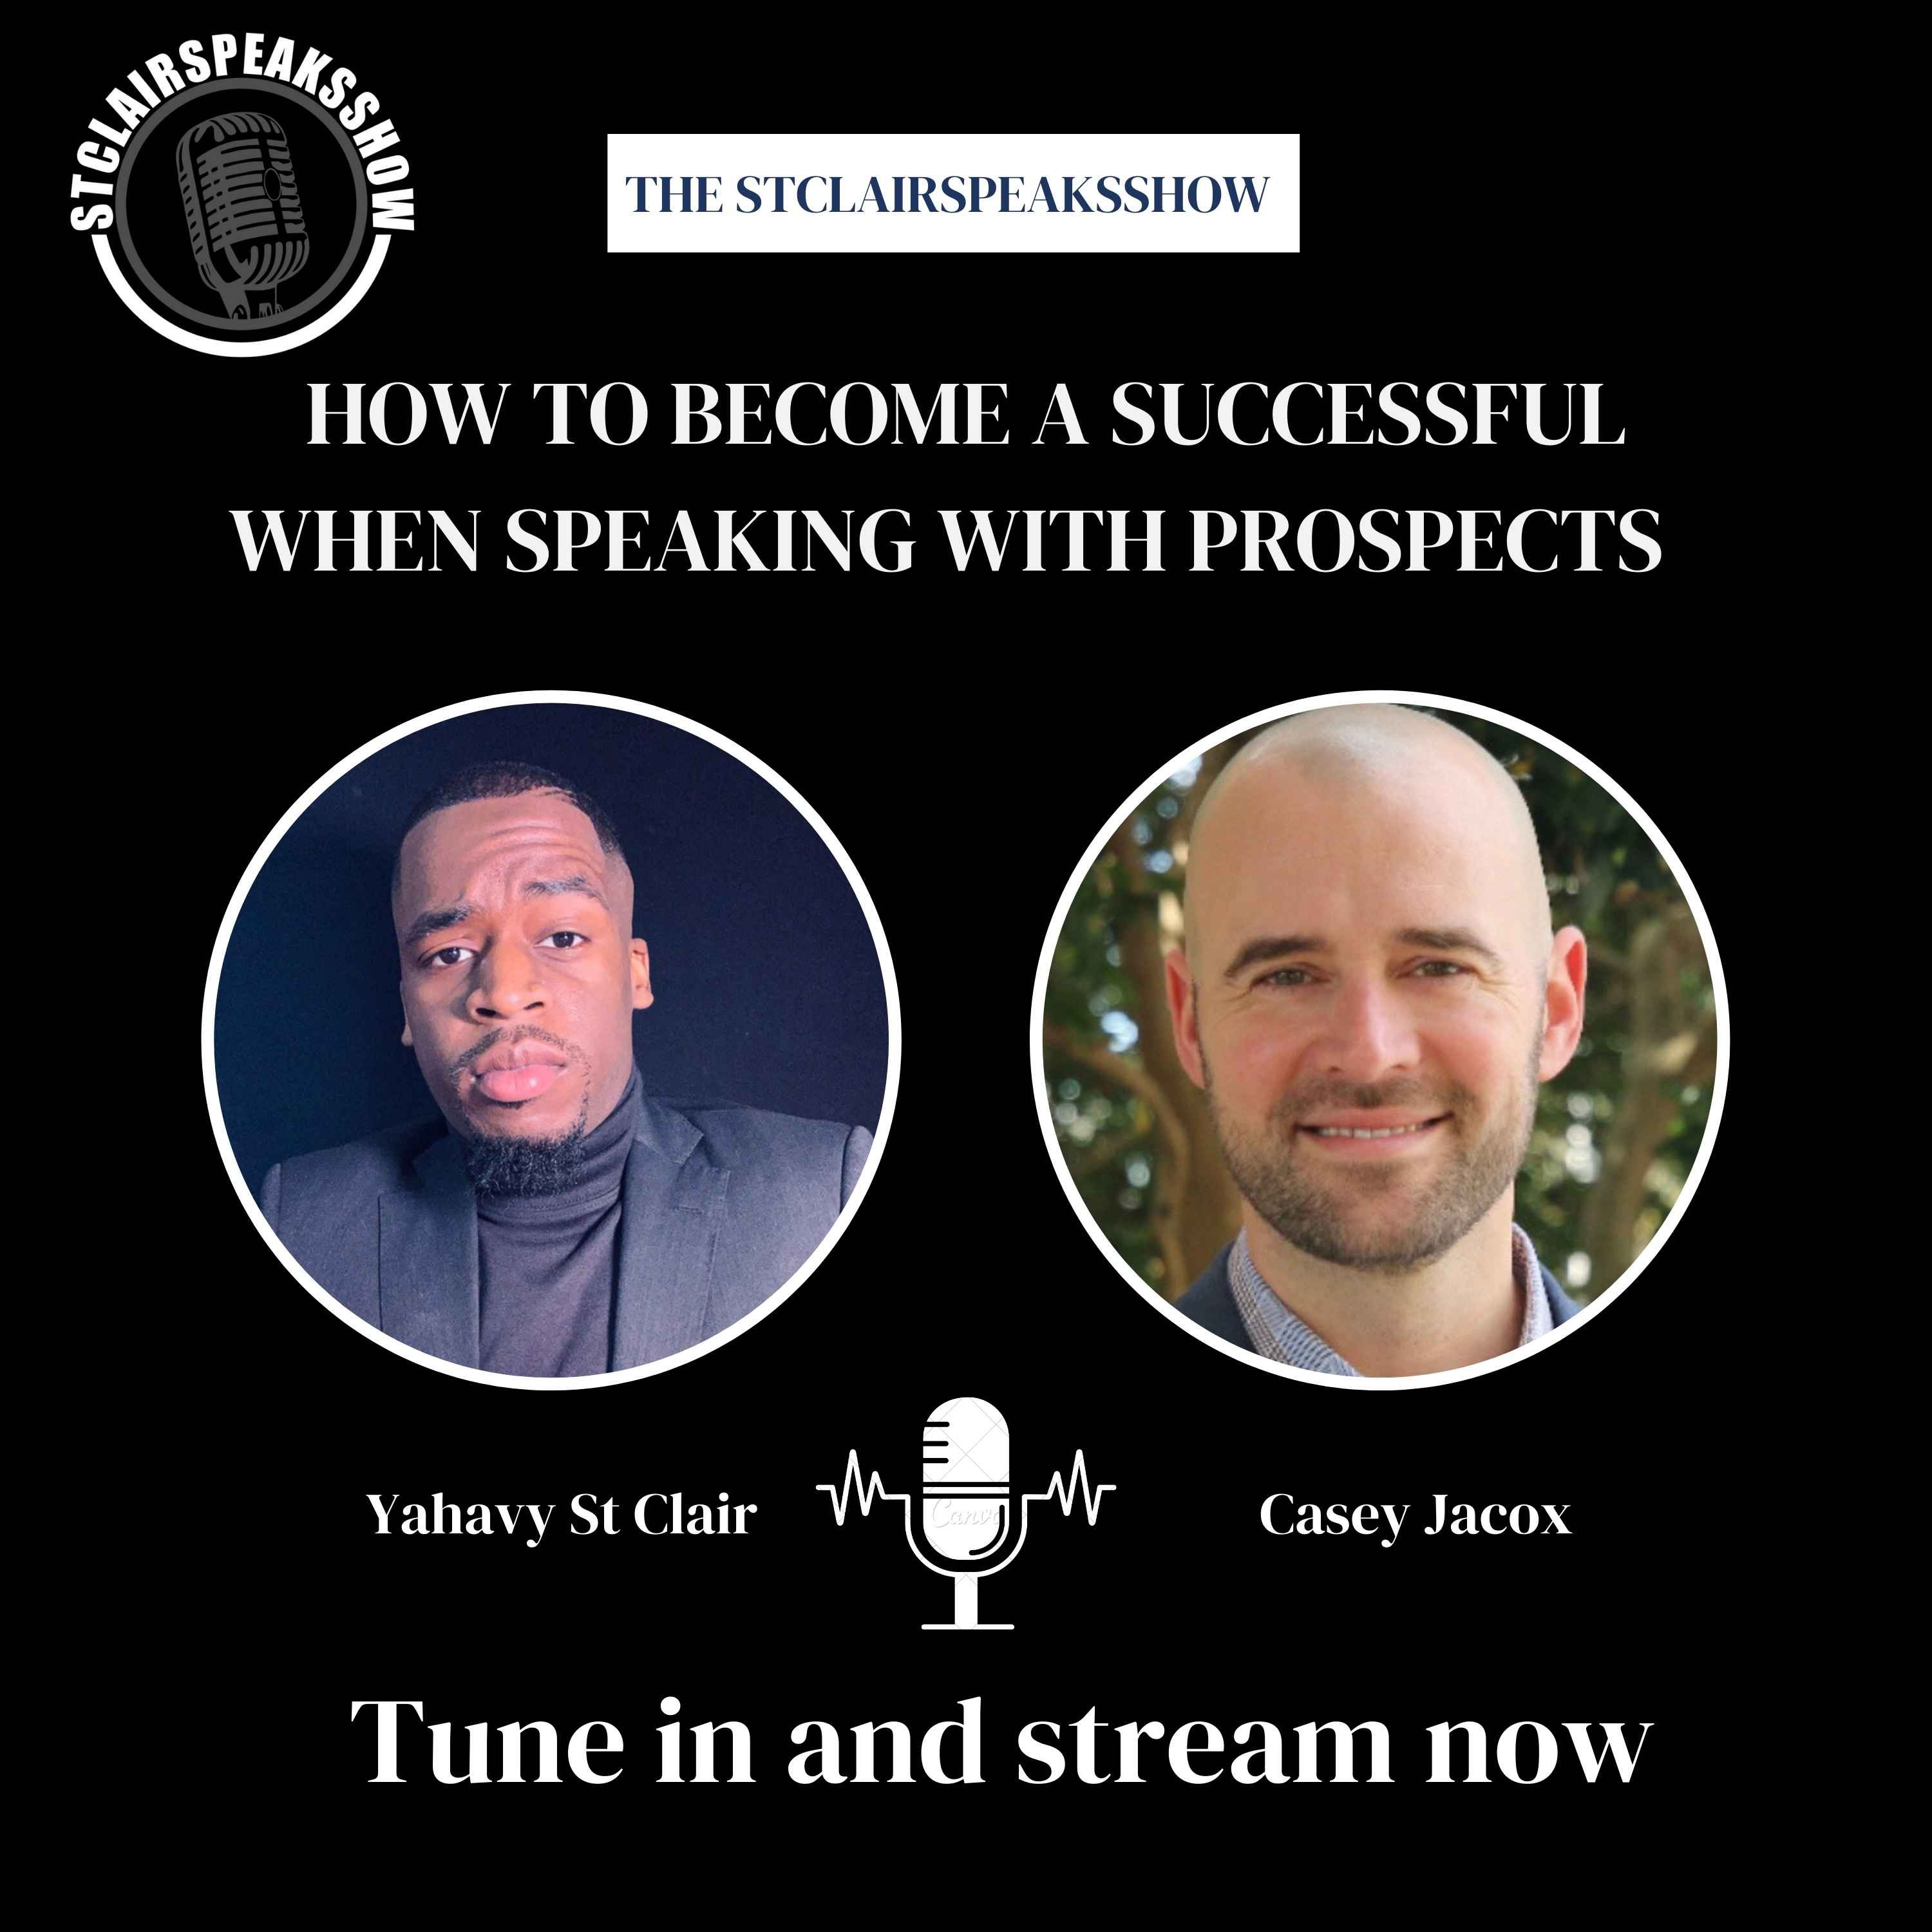 The StclairclairSpeaksShow Featuring Casey Jacox founder of Winning The Relationship, LLC Image